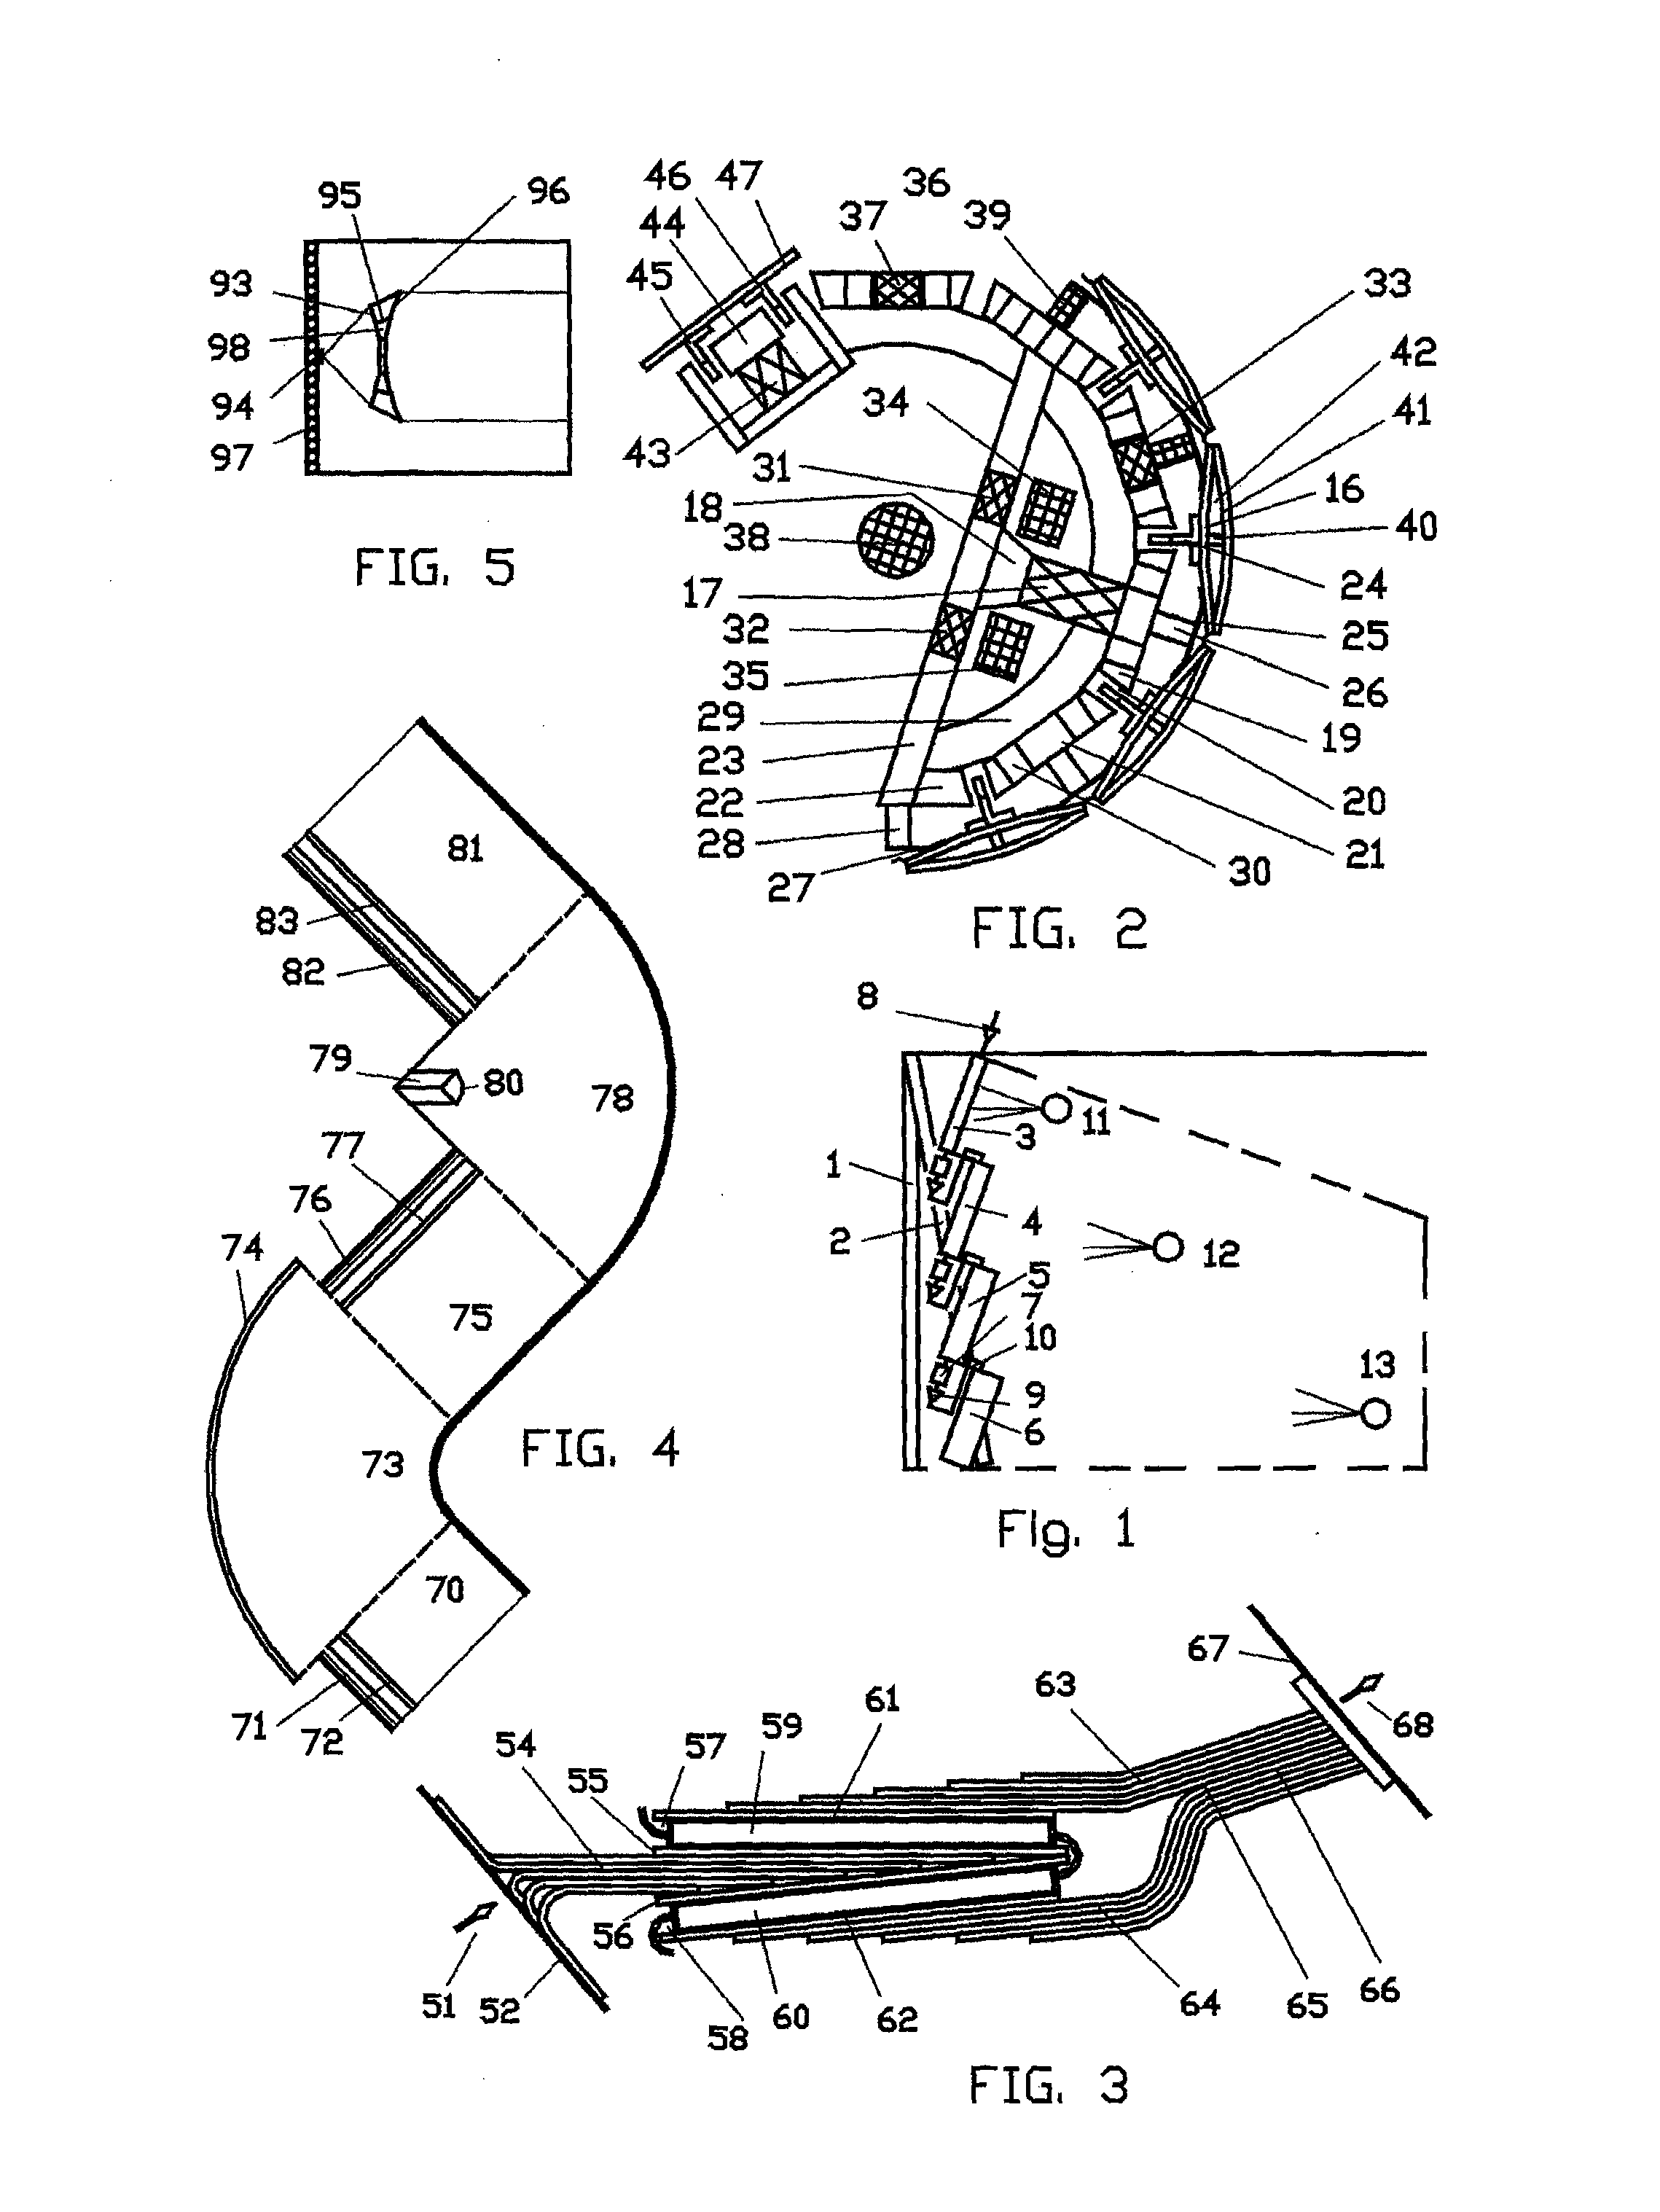 Loudspeaker with distributed driving of the membrane